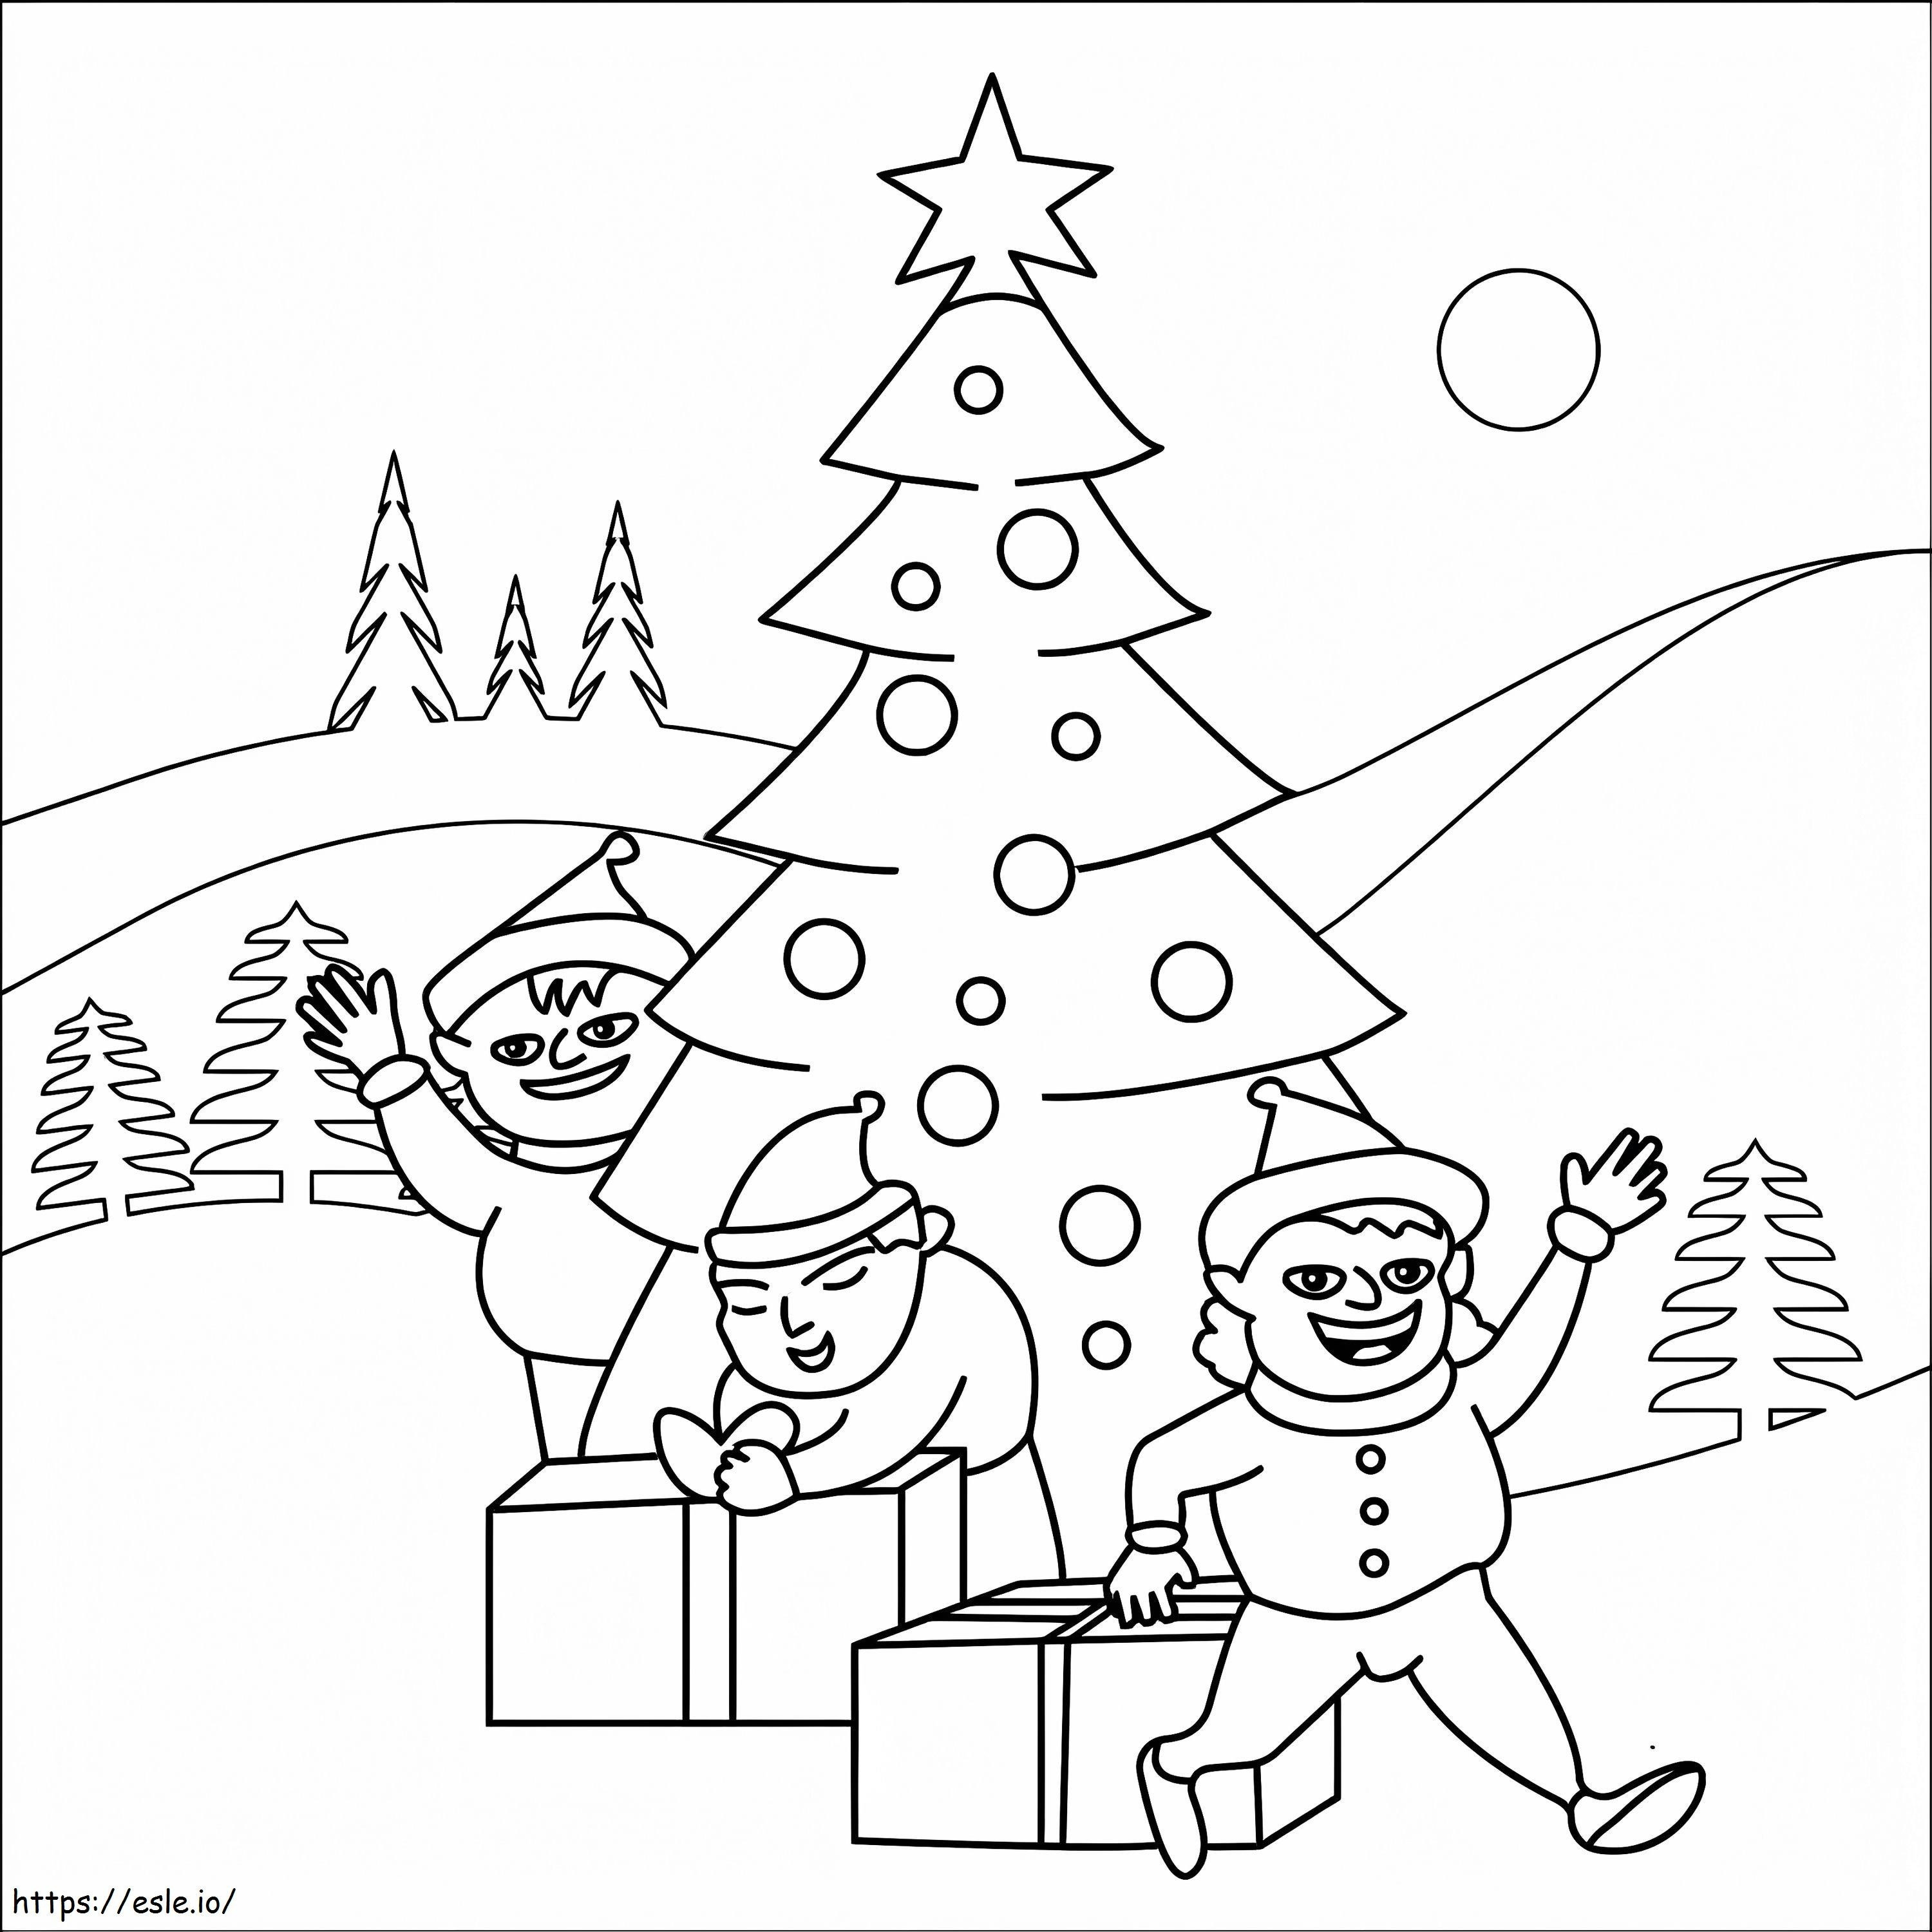 Christmas Tree With Elves coloring page